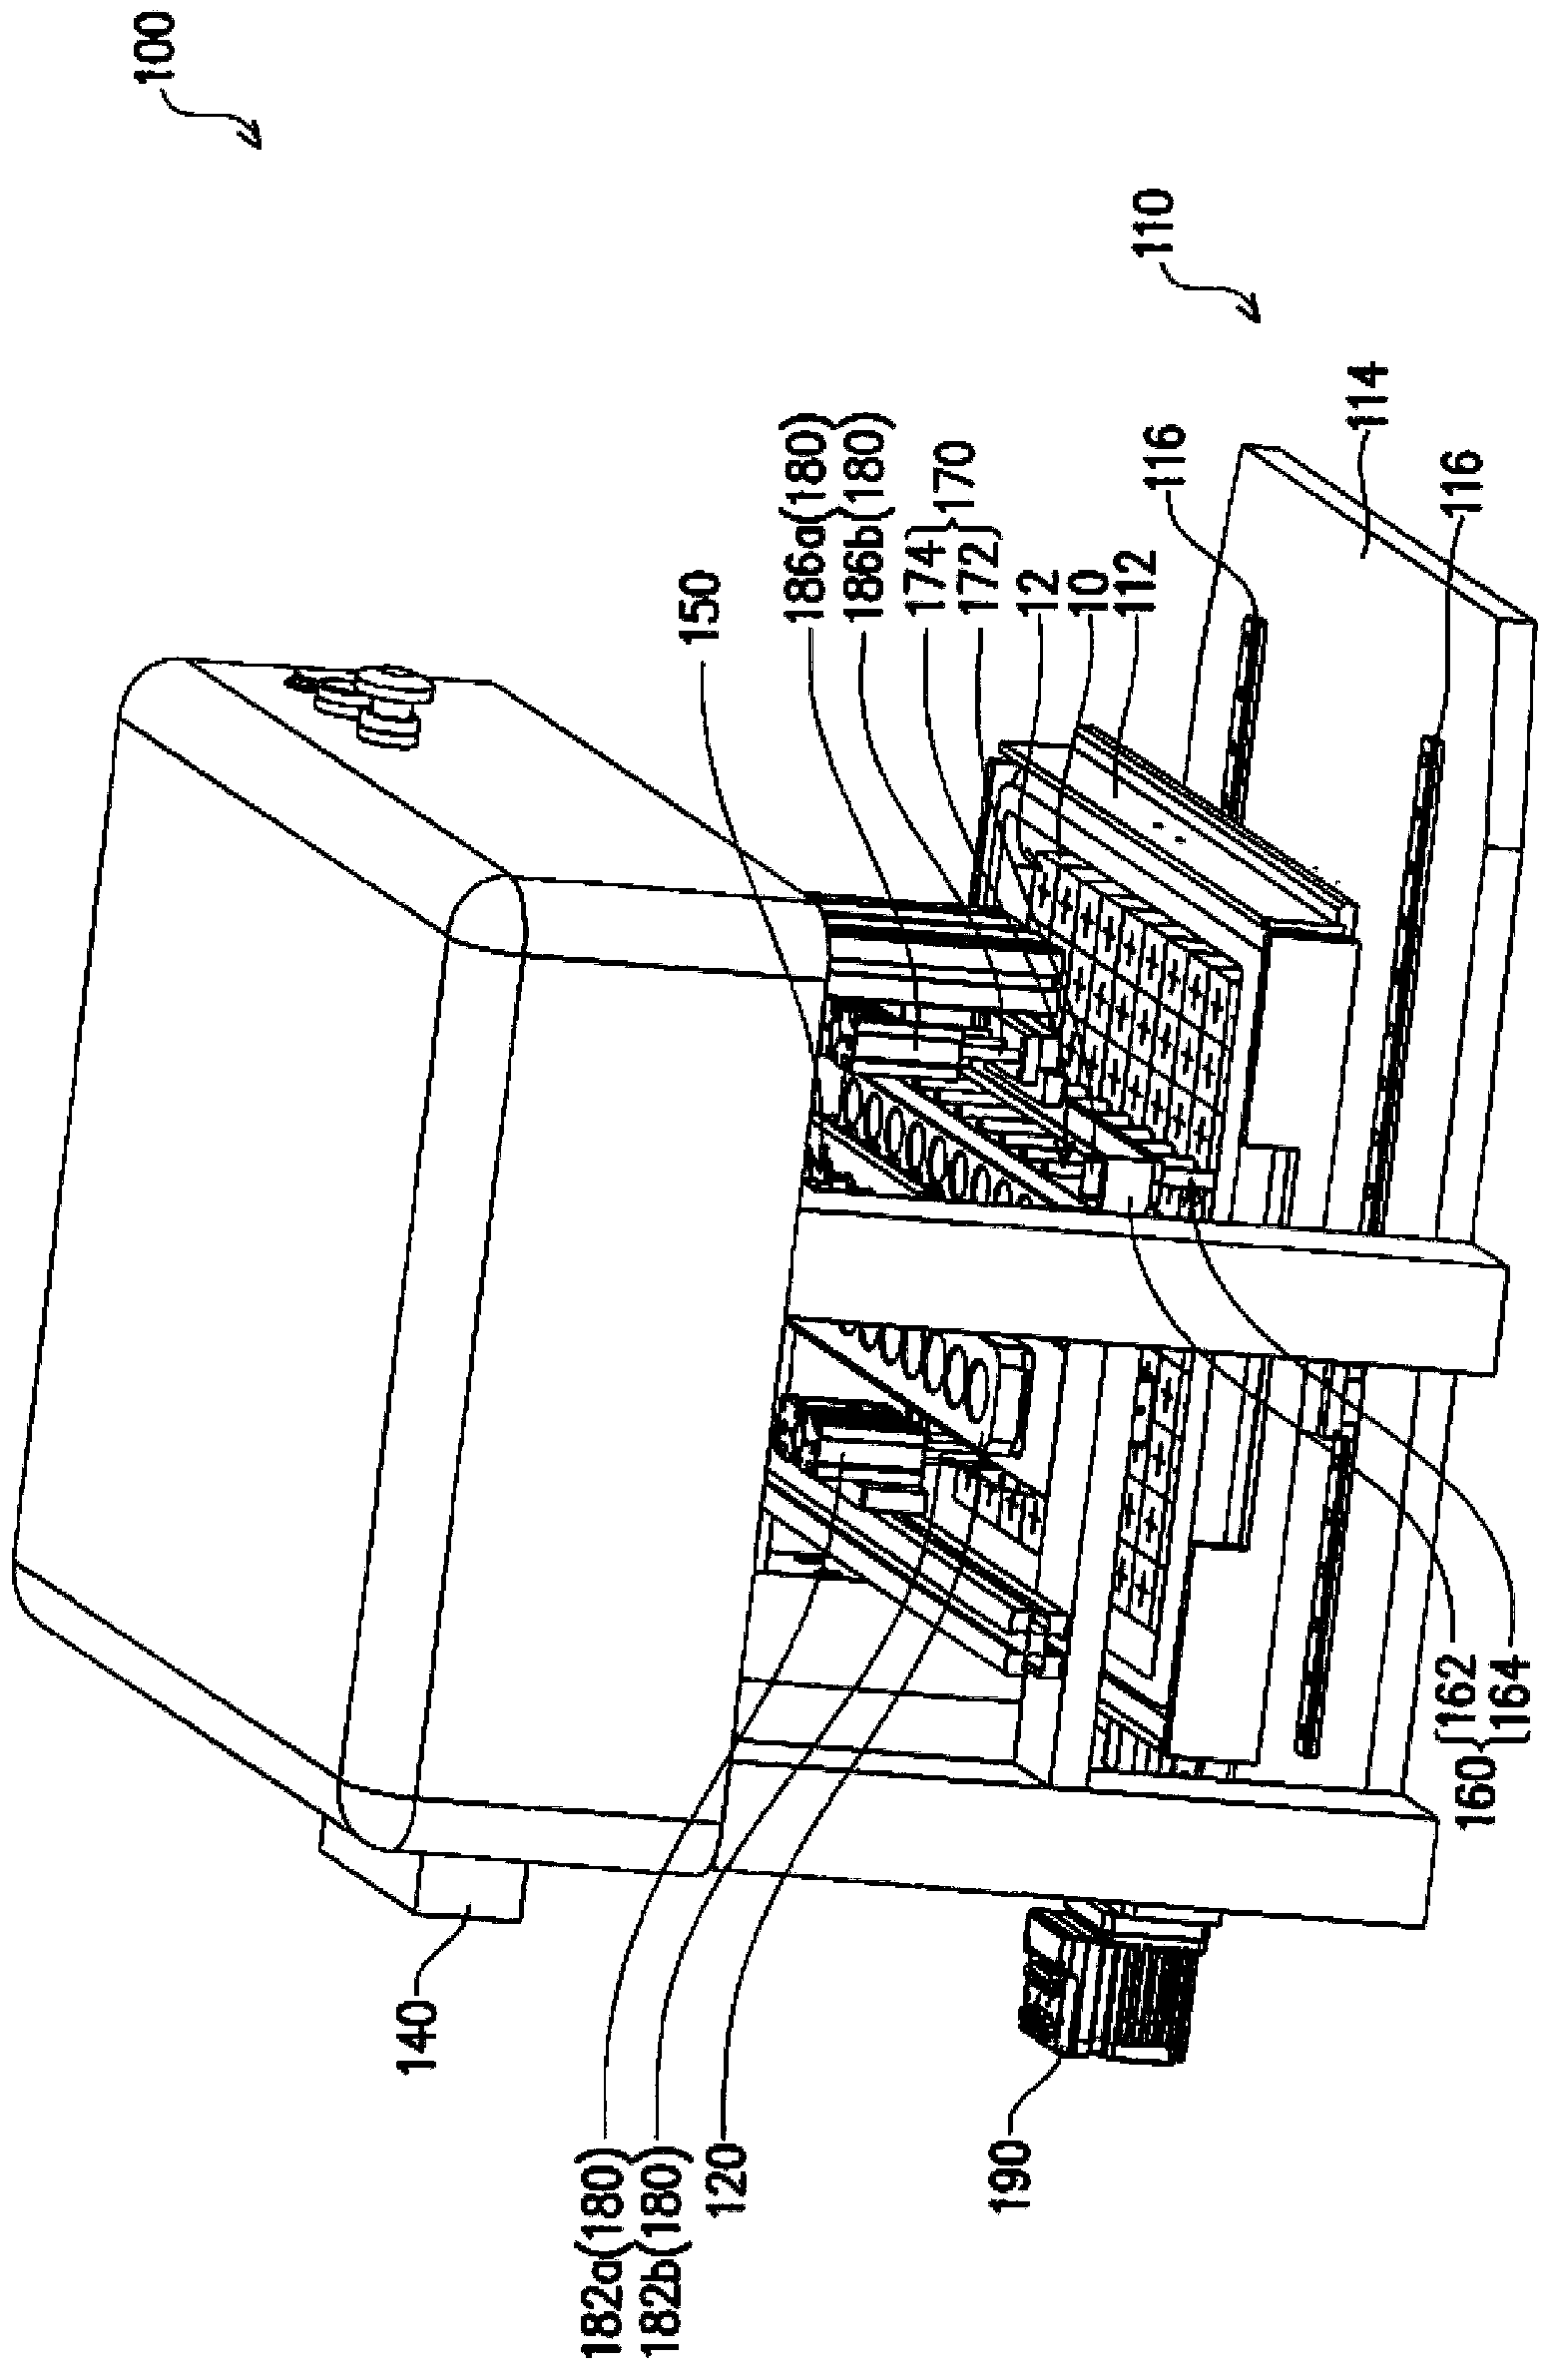 Sowing equipment and seed implanting method